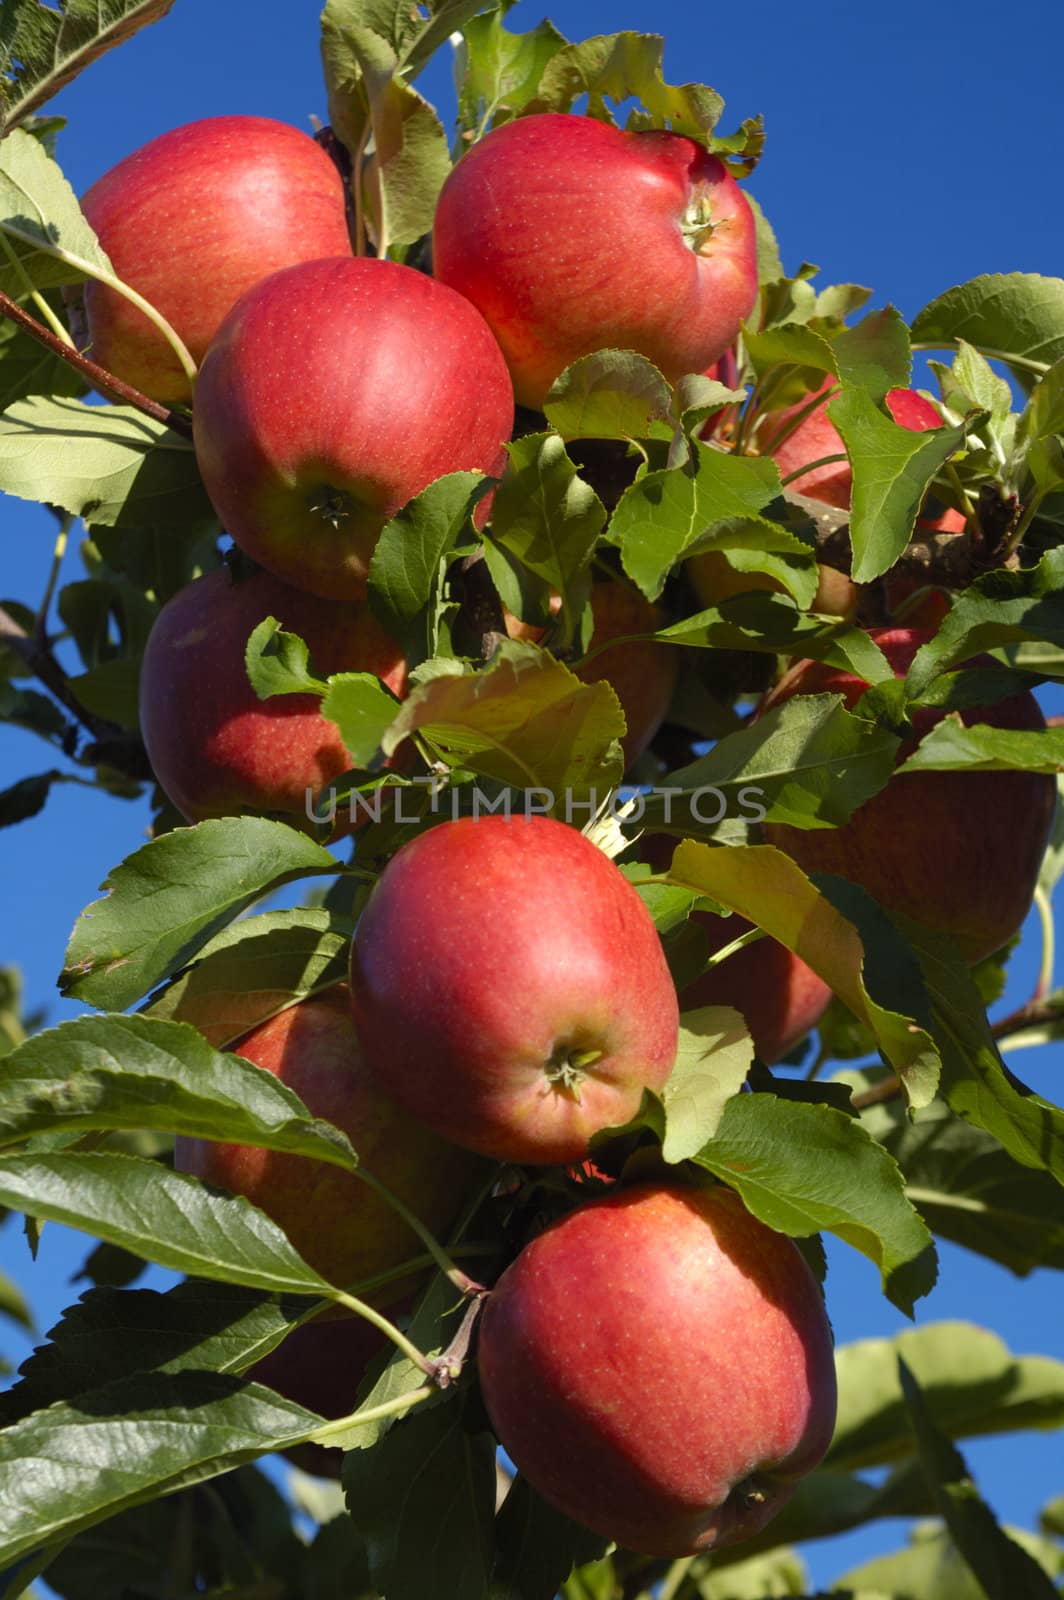 The boughs of an apple tree in late summer, laden down with rich red fruit, set against a clear blue sky.